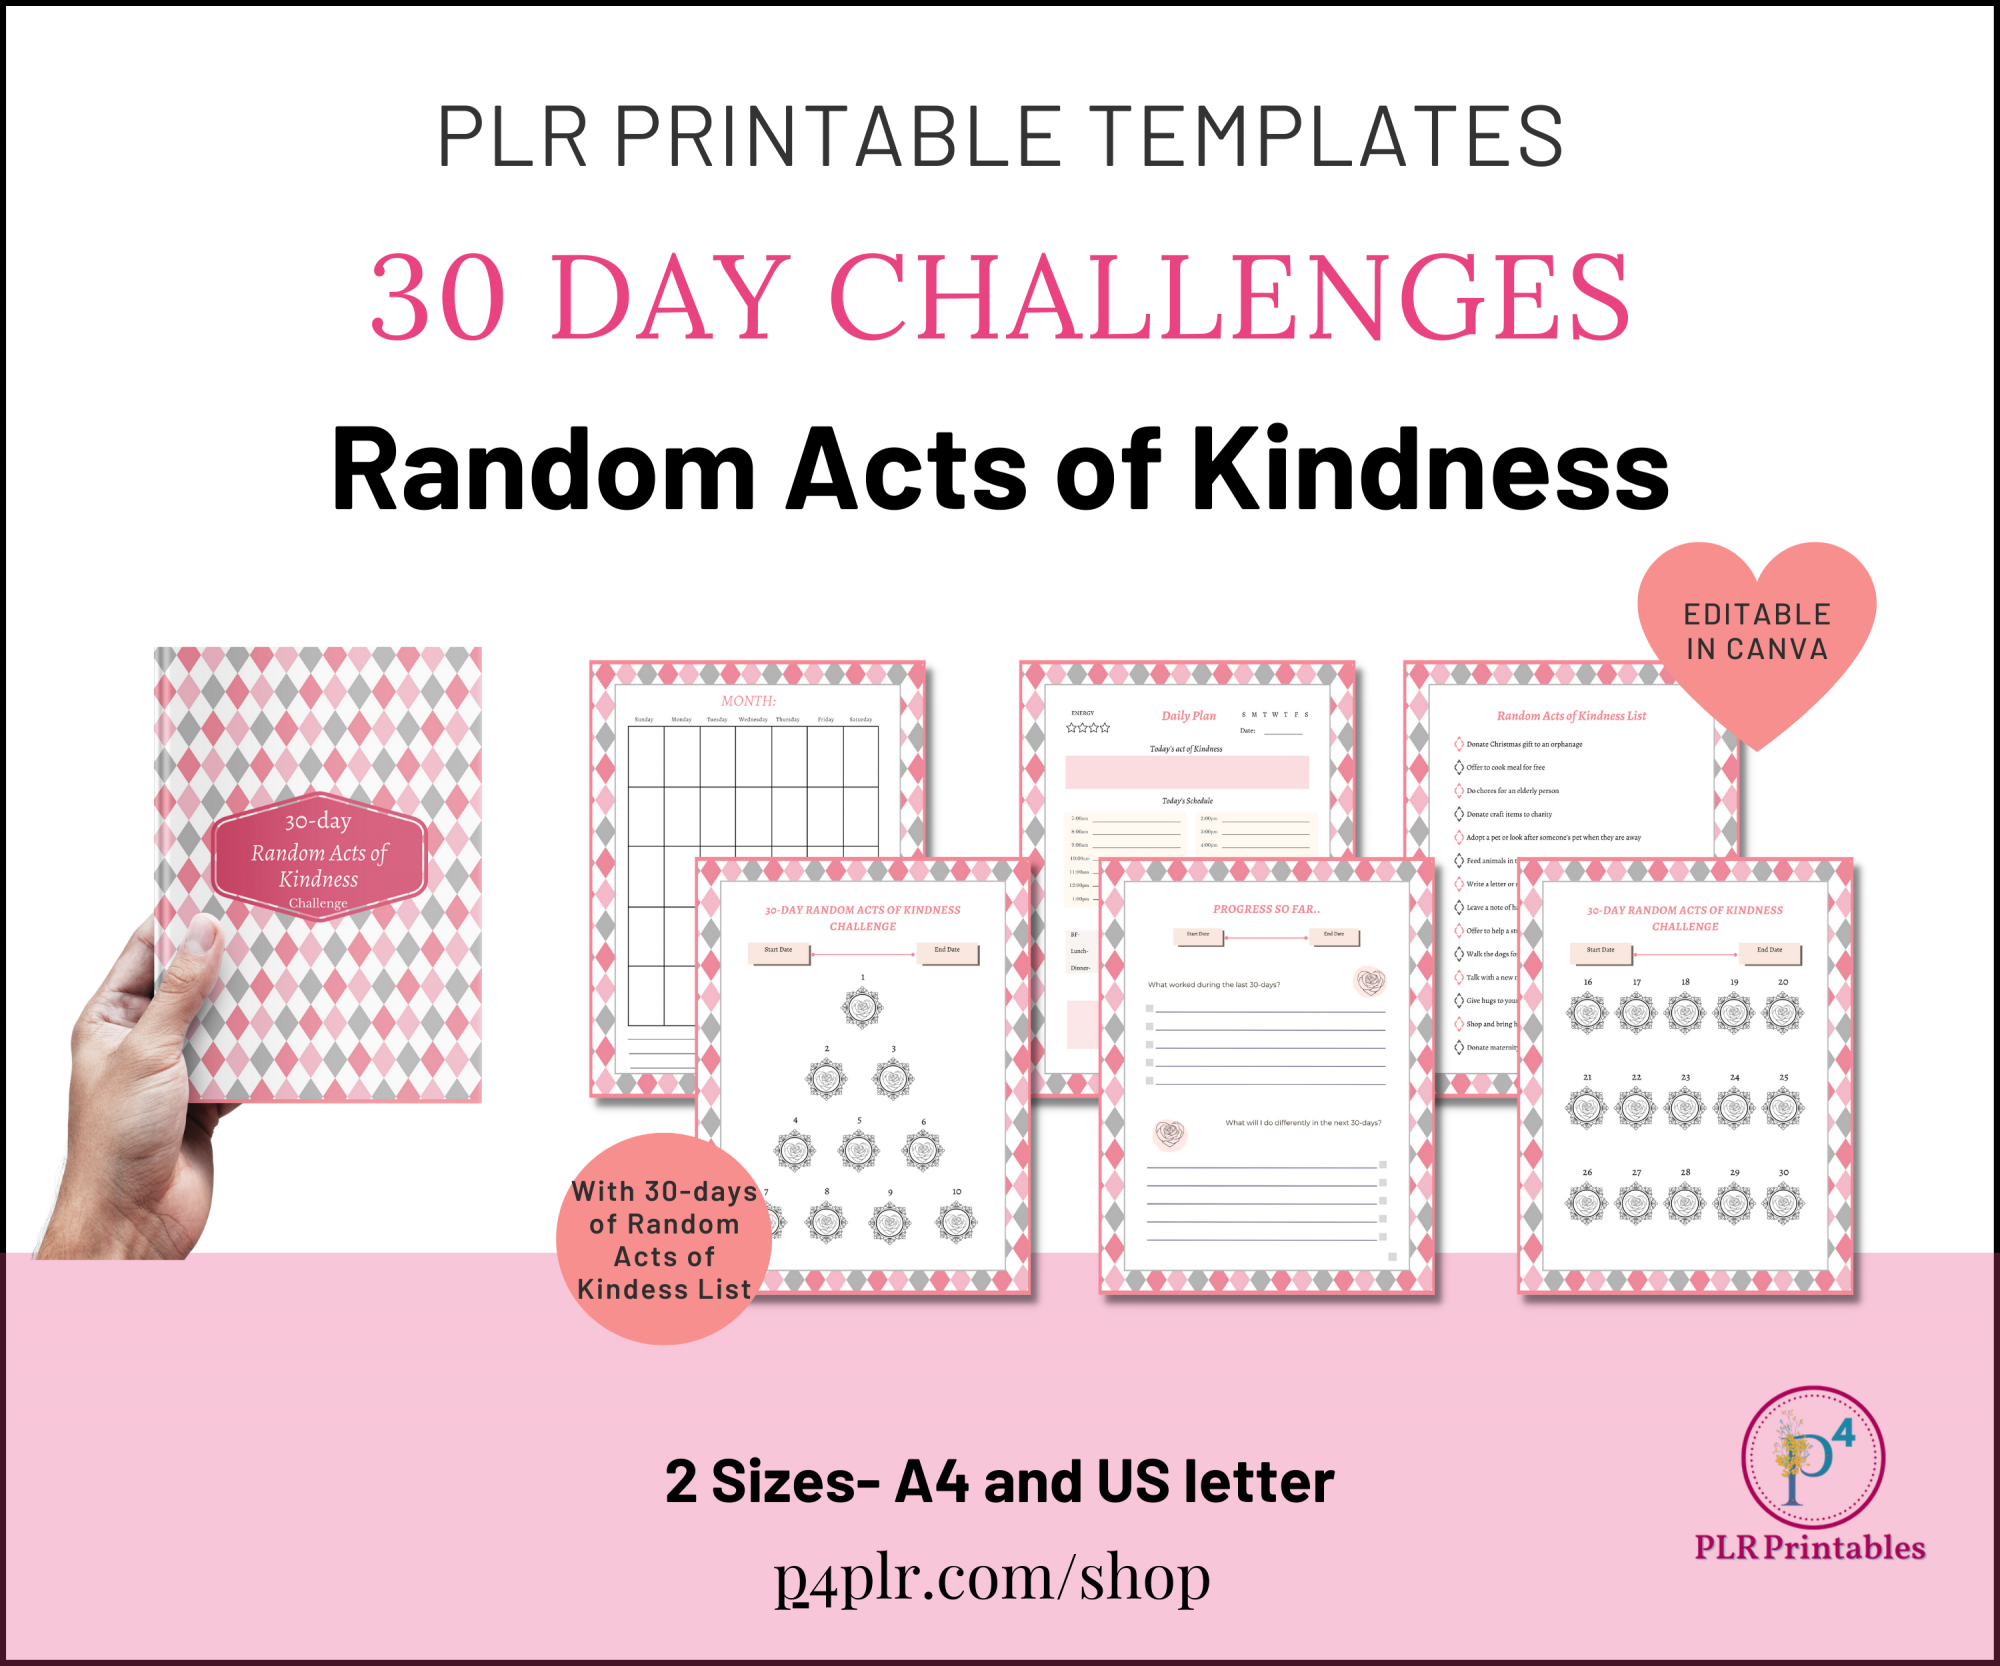 NEW 30 Day Challenge PLR- Random Acts of Kindness